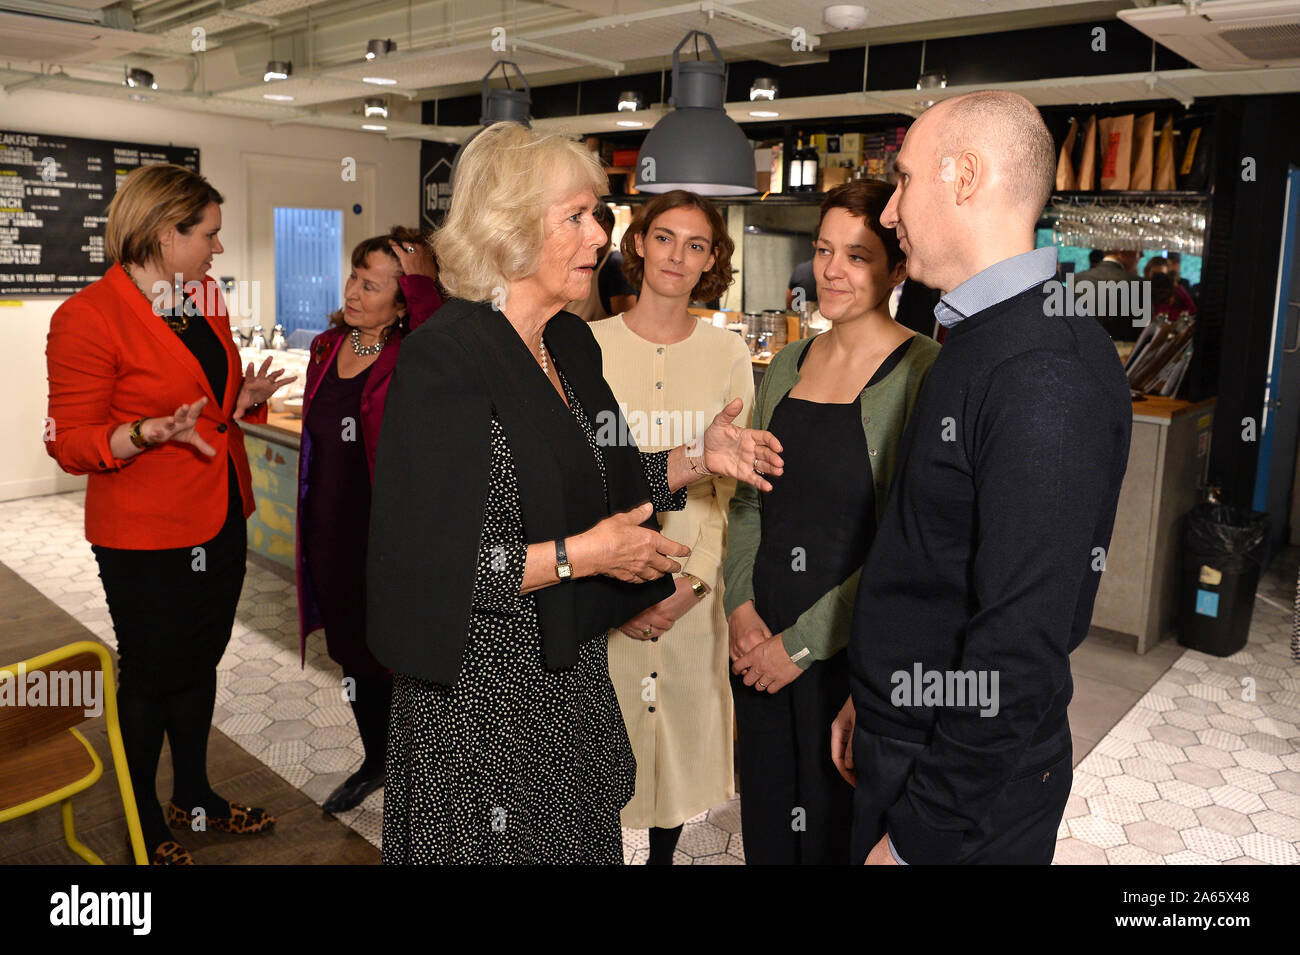 The Duchess of Cornwall meets with authors Rachel Seiffert and Stephen Kelman during a tea reception at KPMG's Mayfair Cafe to mark the 7th anniversary of the National Literacy Trust's Books Unlocked programme which provides free copies of Booker Prize shortlisted titles to people in prison library groups to read, discuss and keep. PA Photo. Picture date: Thursday October 24, 2019. See PA story ROYAL Camilla. Photo credit should read: Jeff Spicer/PA Wire Stock Photo